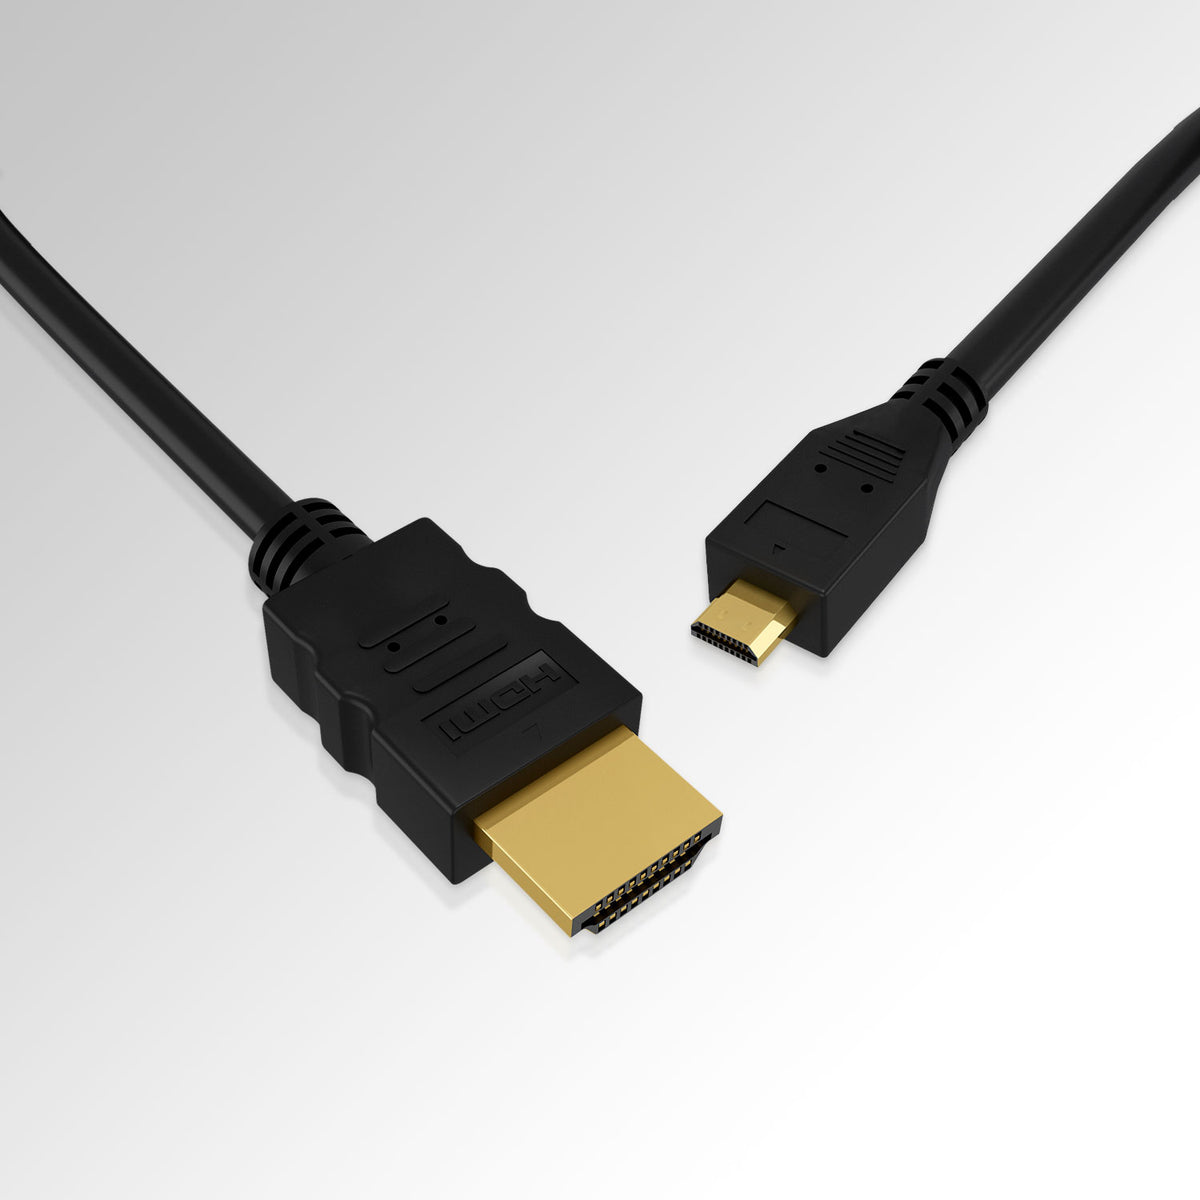 Micro HDMI to HDMI Adapter Cable (Male to Male) – Retroid Pocket